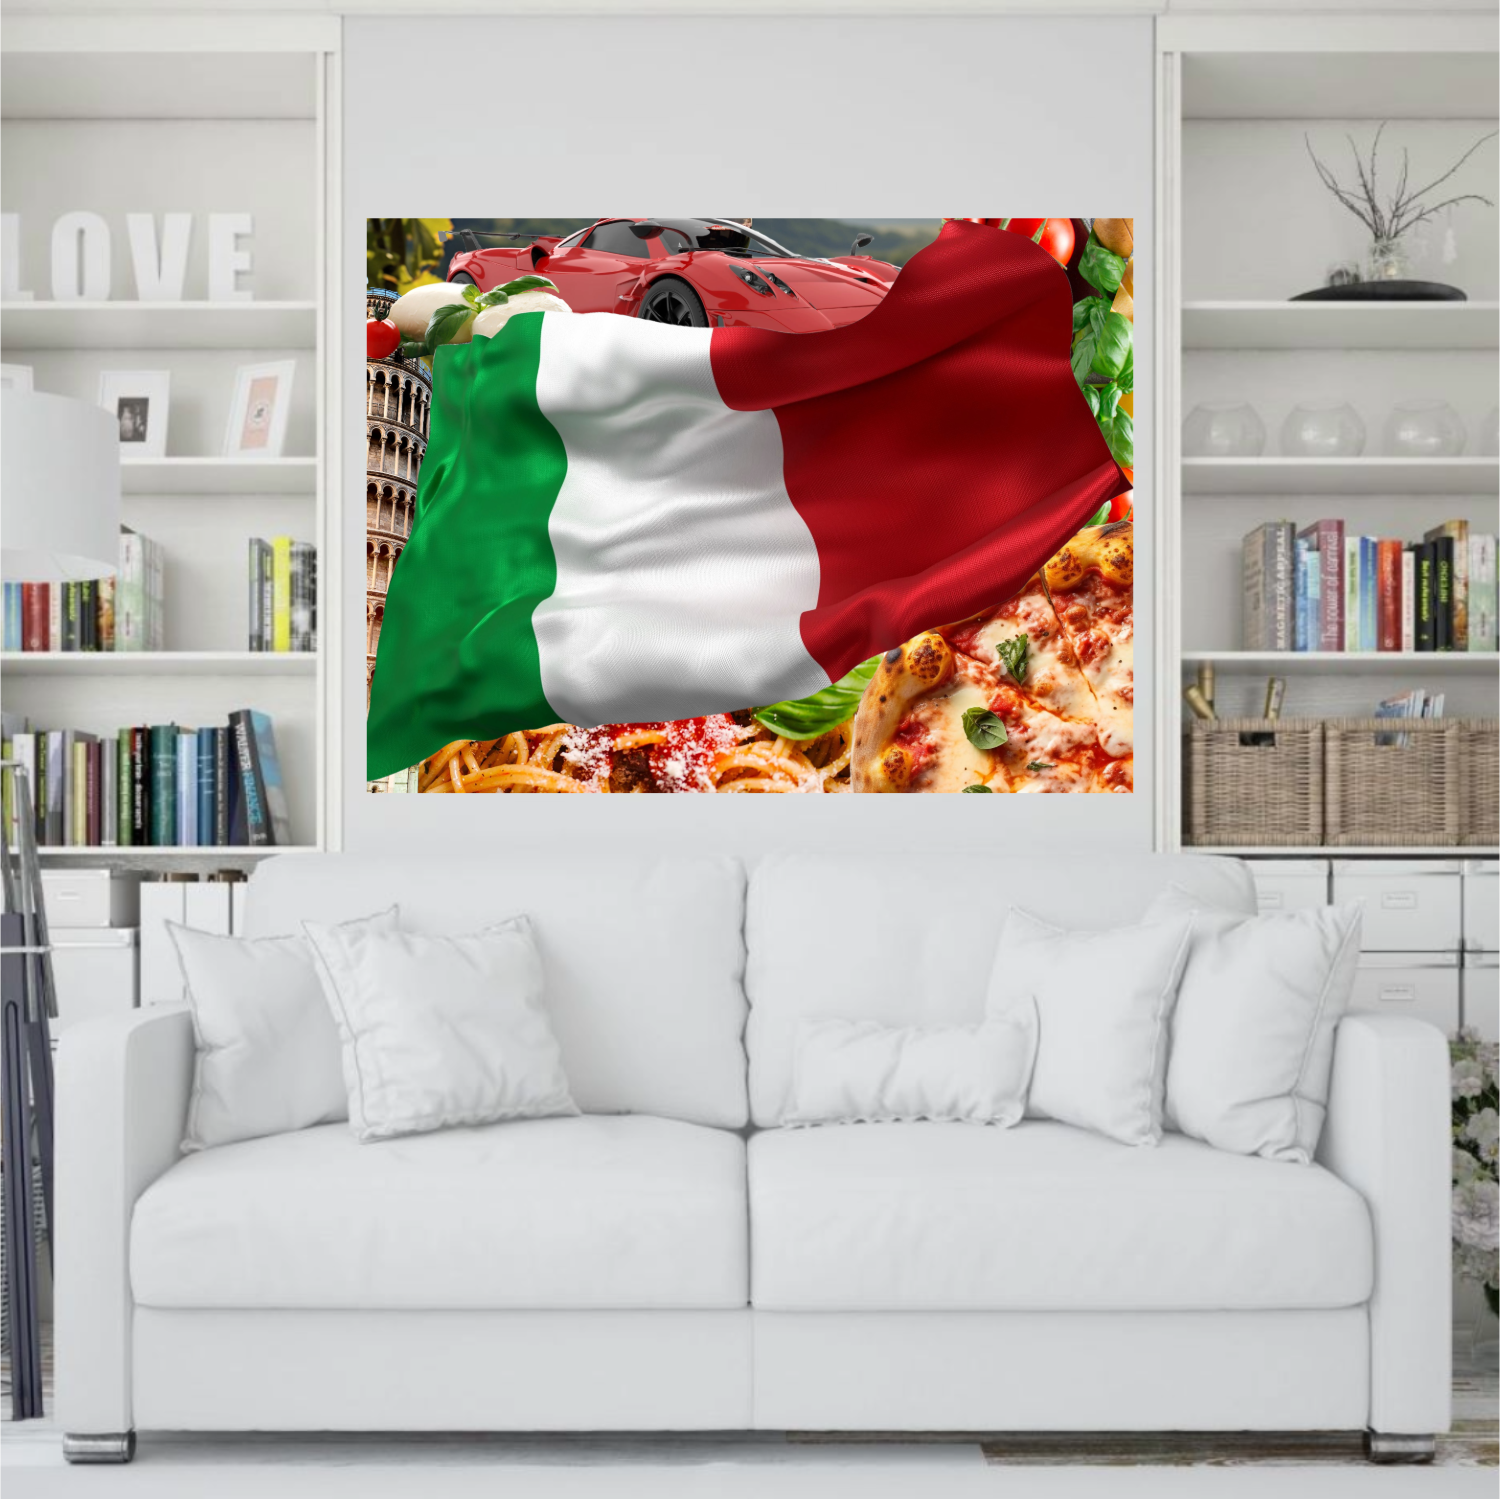 Wall Art ITALY ITALIAN Flag Canvas Print Painting Original Giclee GW Love Nice Beauty Fun Design Fit House Home Office Gift Ready Hang Living